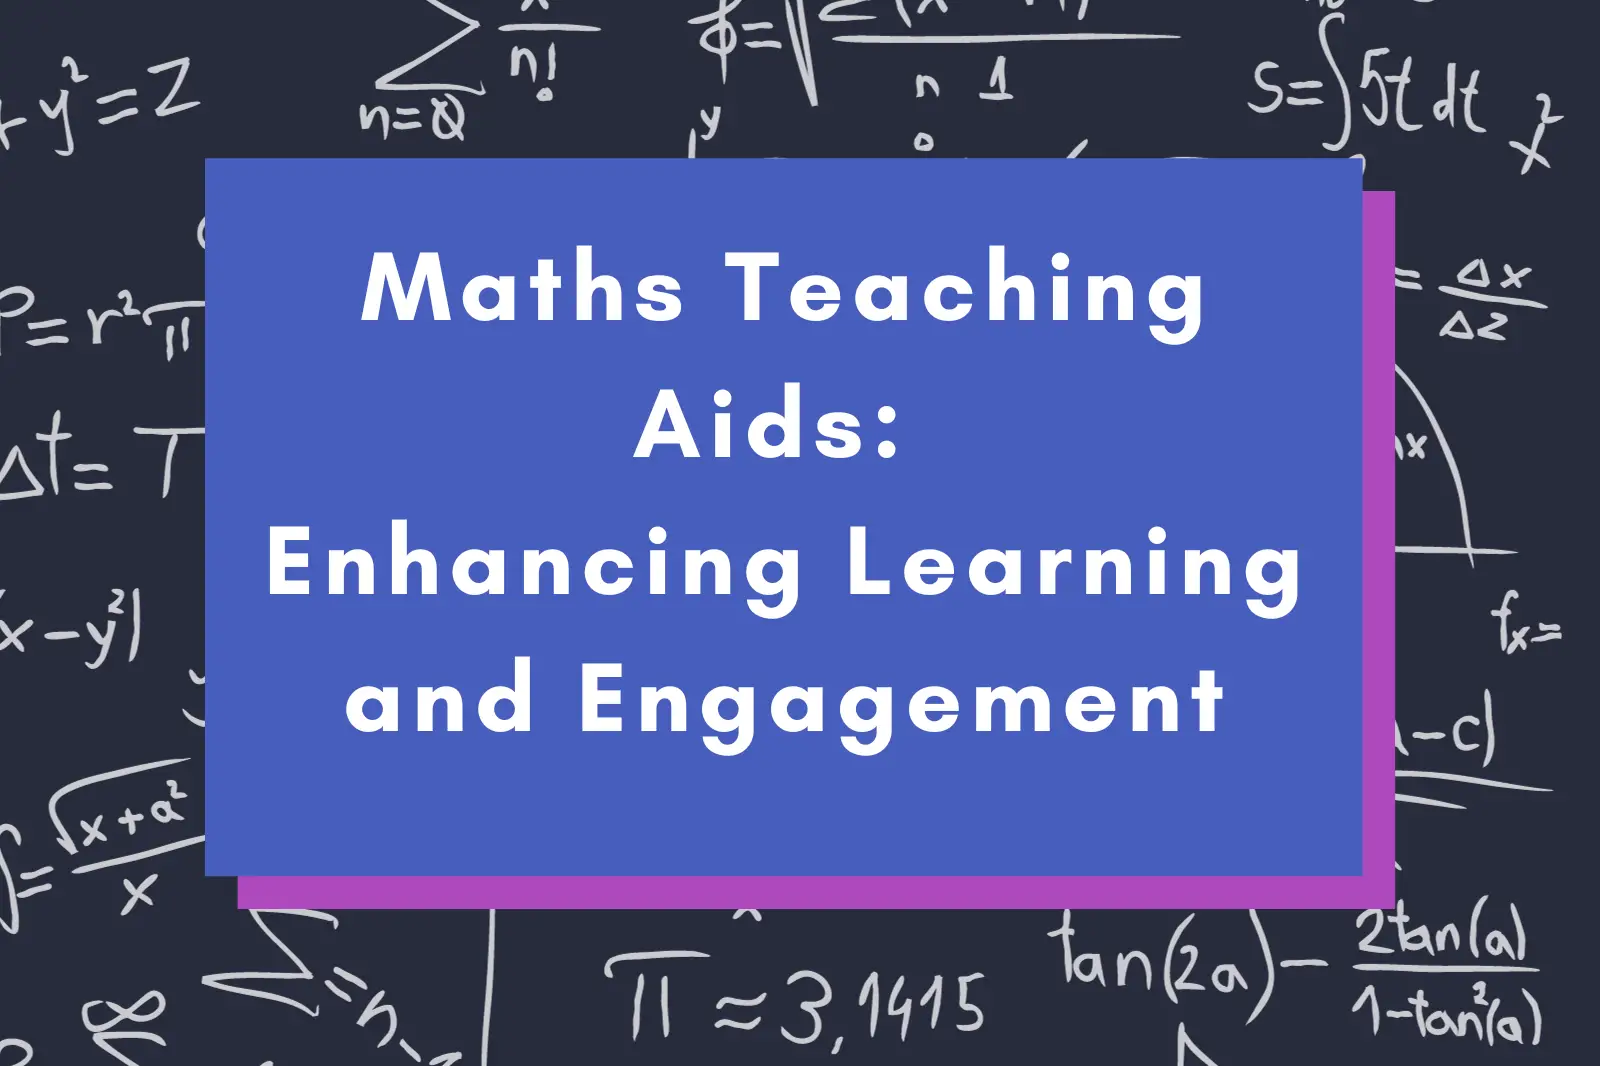 Maths Teaching Aids: Enhancing Learning and Engagement